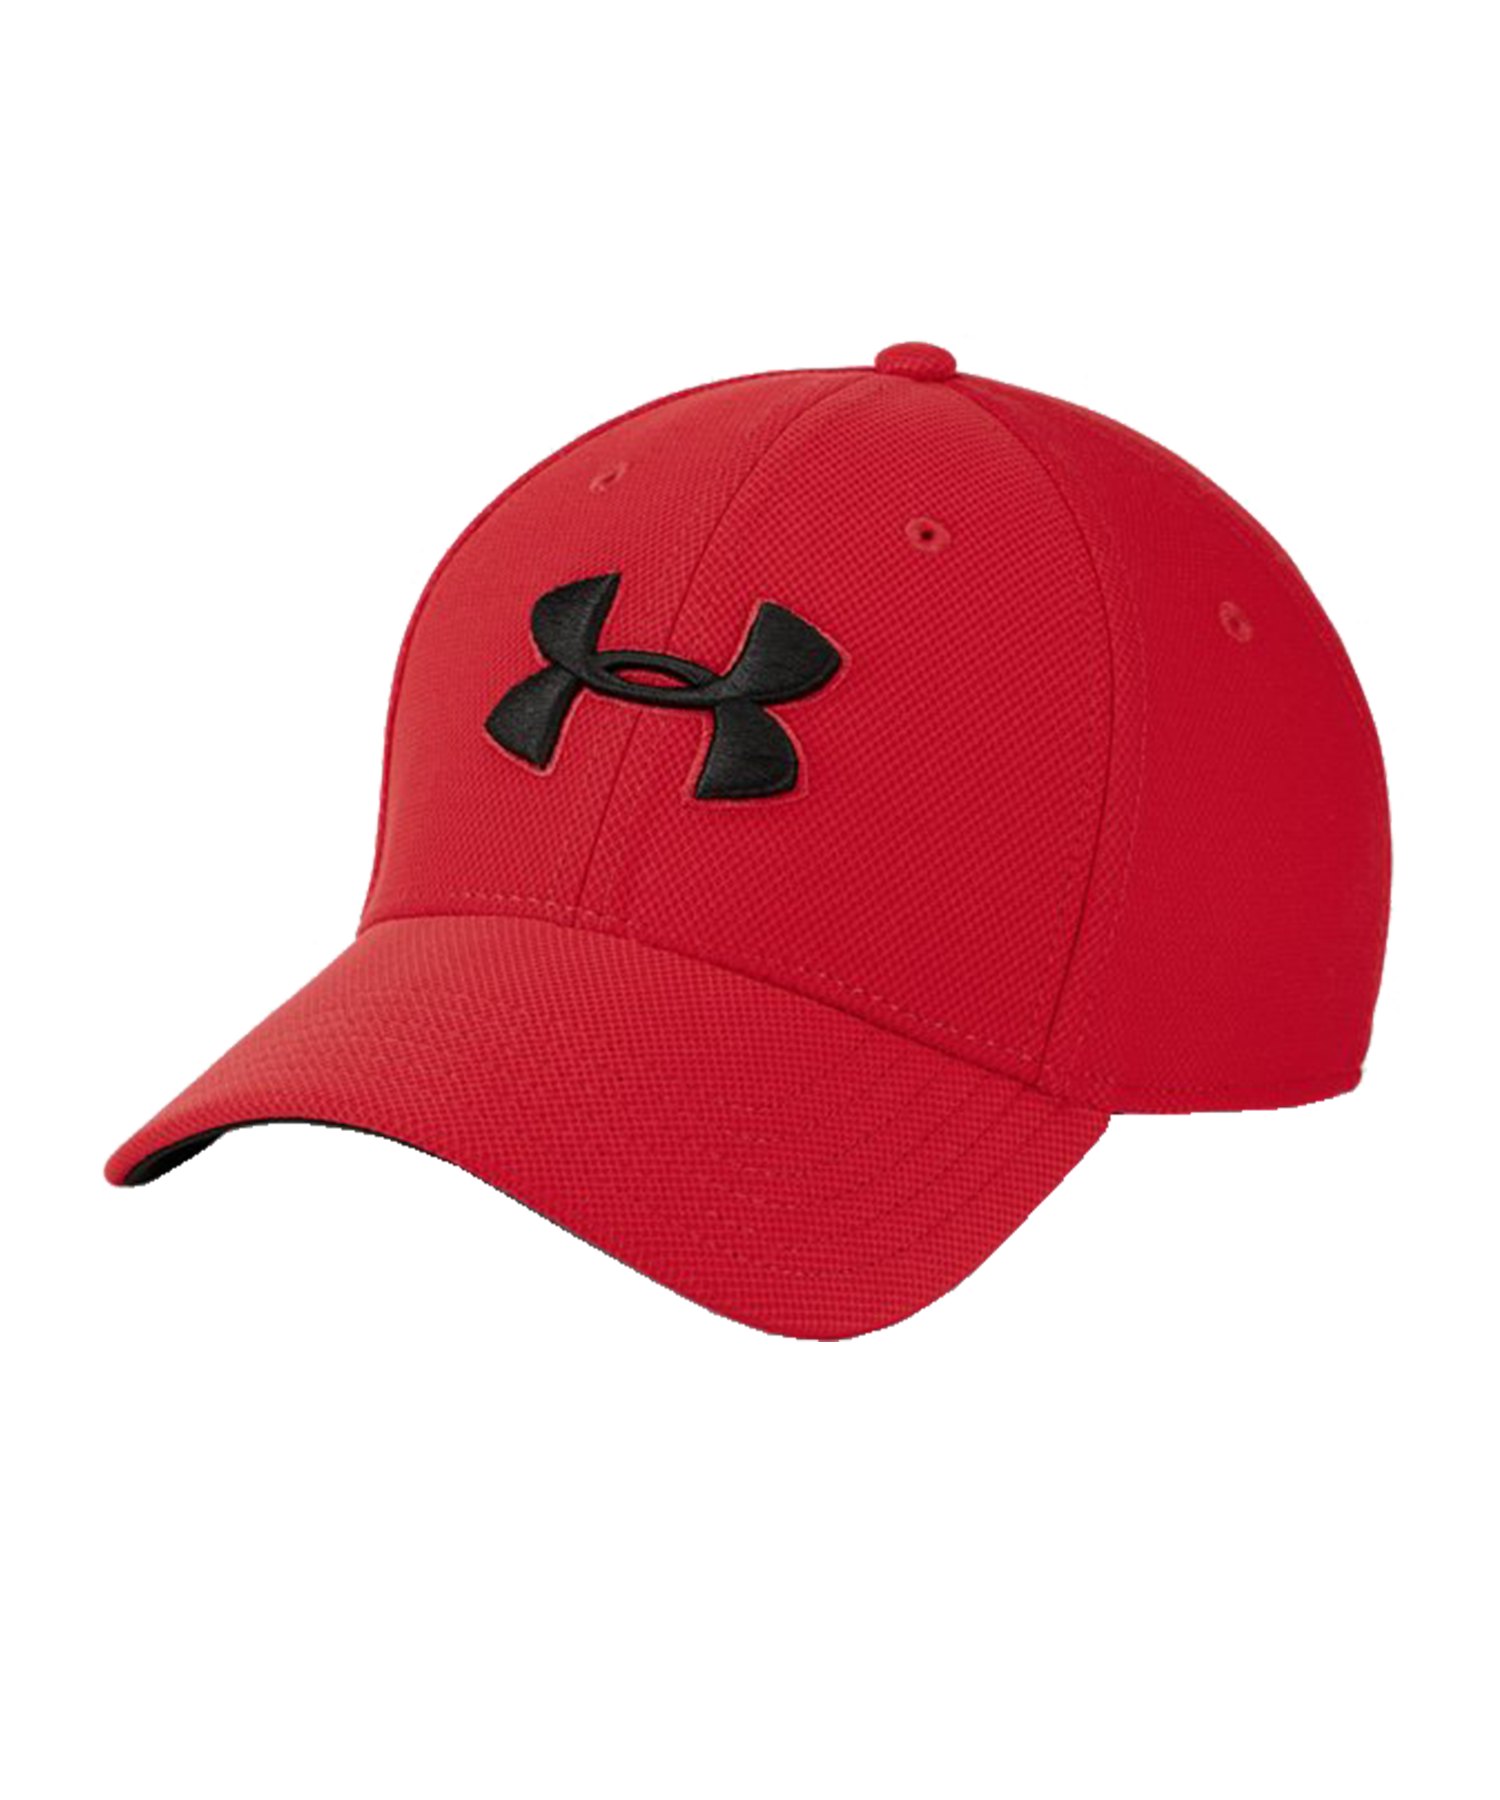 Under Armour Blitzing 3.0 Cap Rot F600 - Rot